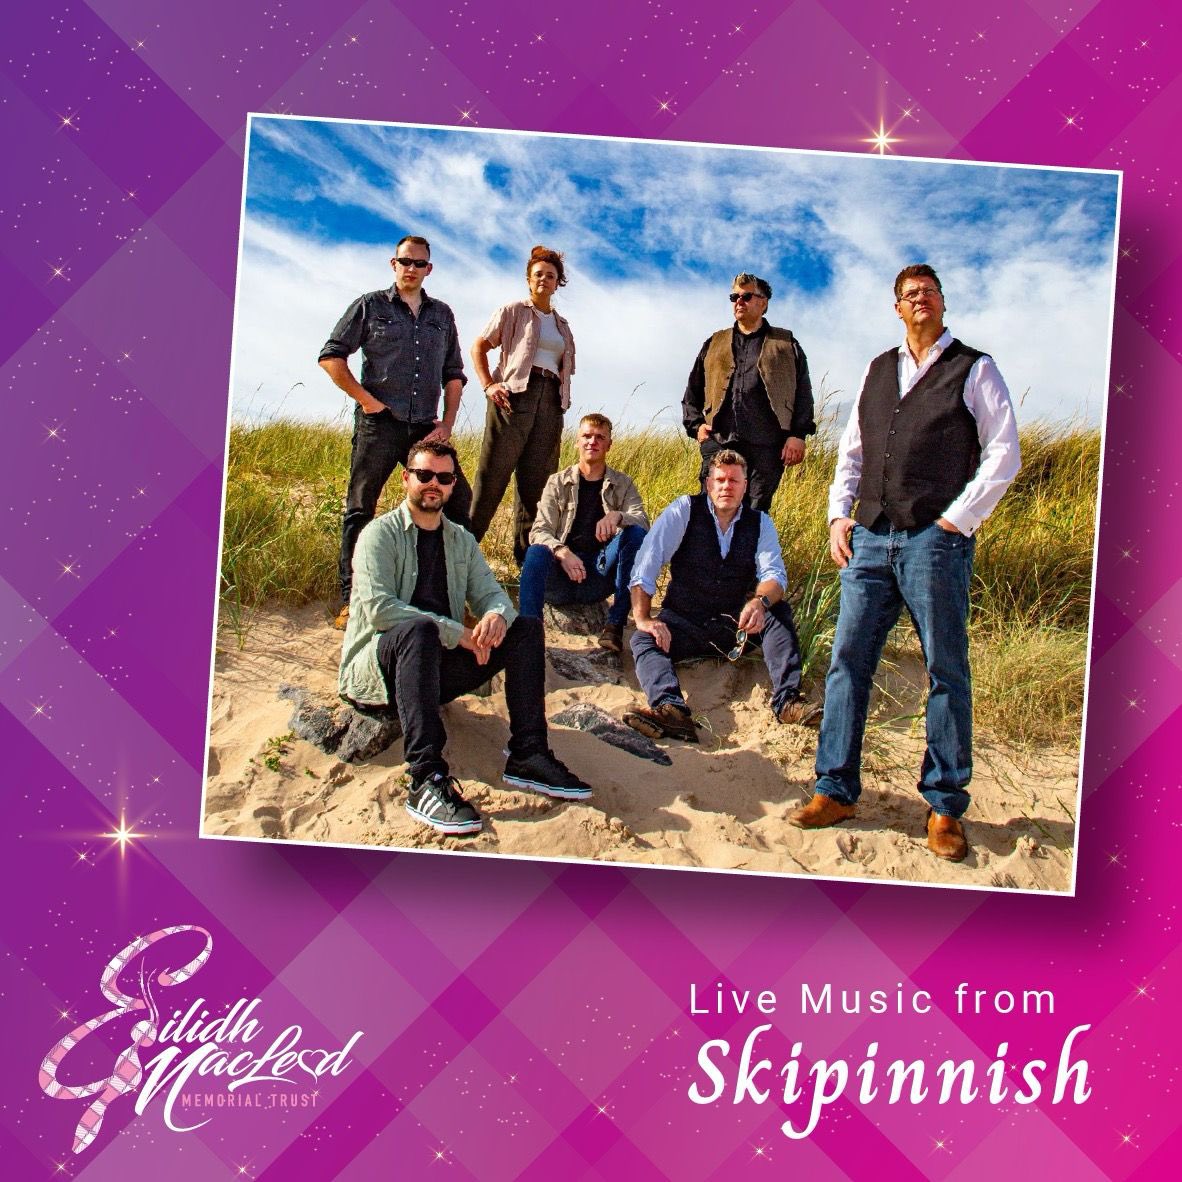 We're thrilled to announce that Celtic music legends @Skipinnish will headline our gala ball in May. We're delighted they've made time in their 25th anniversary year to entertain our amazing guests at the Glasgow event.💜 Don't miss out on a top night: eventbrite.co.uk/e/eilidhs-trus…